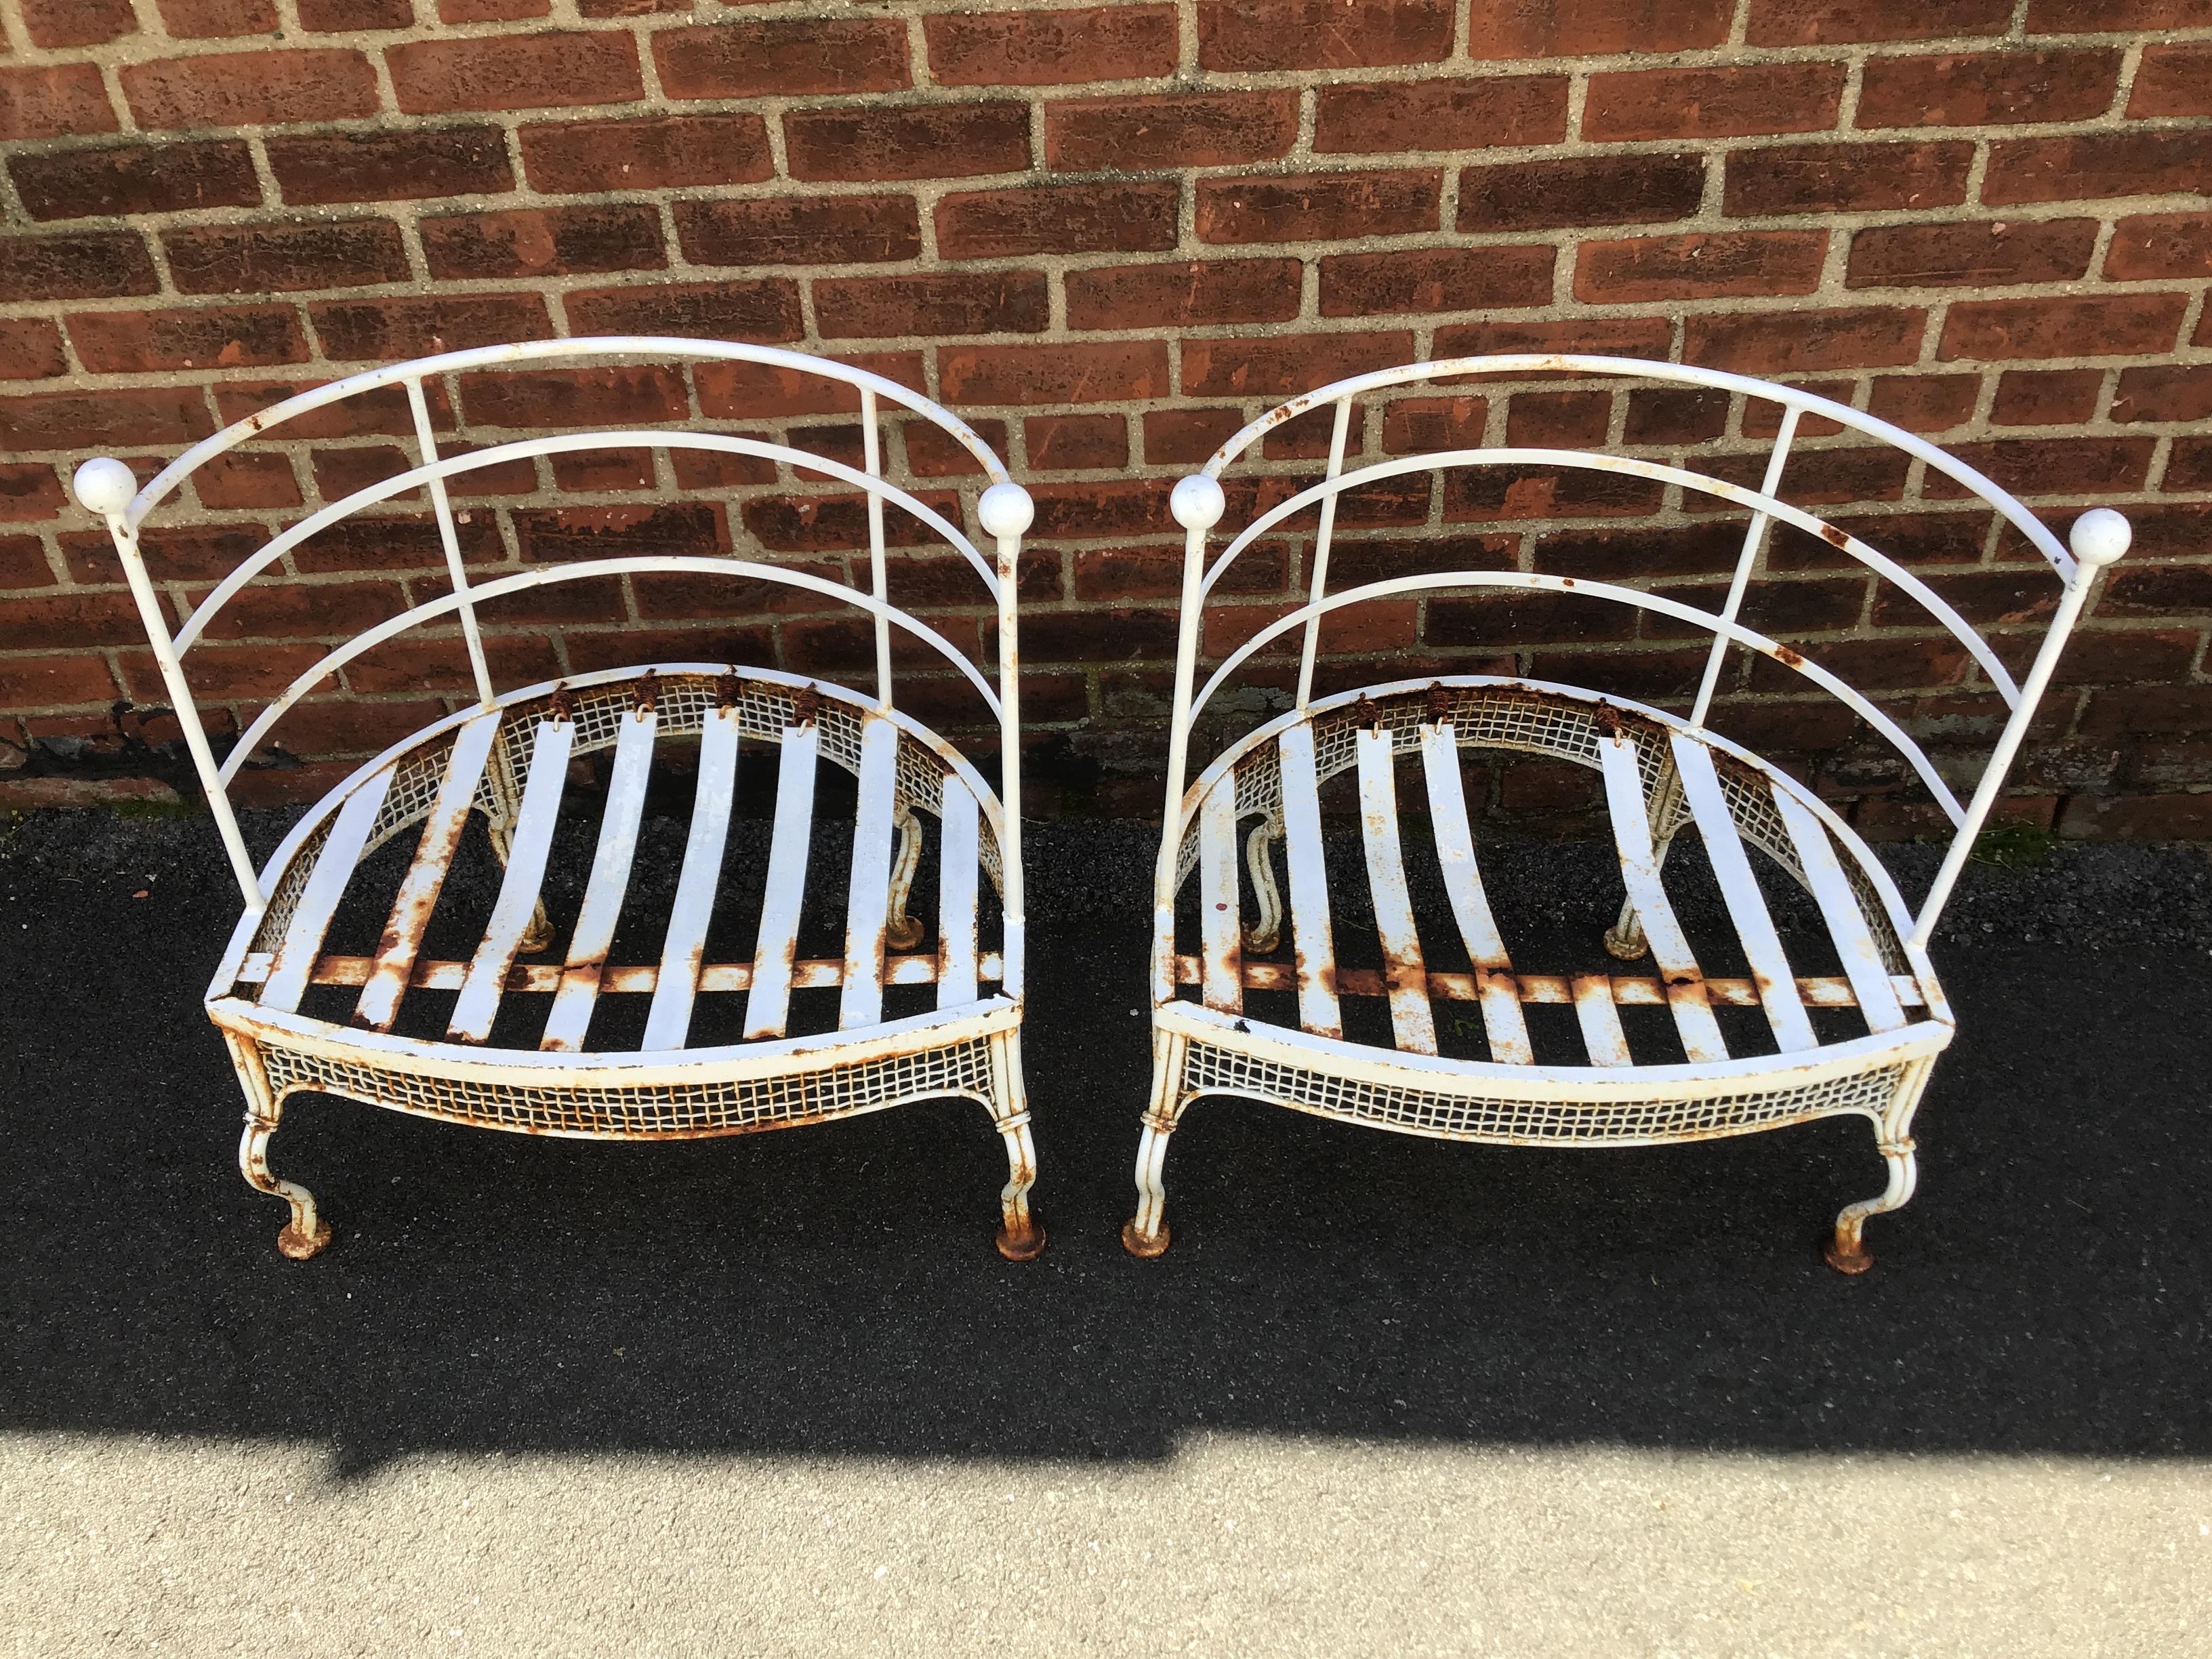 Pair of 1950s Woodard garden tub chairs. Chairs need painting. One metal strip on seating is gone.